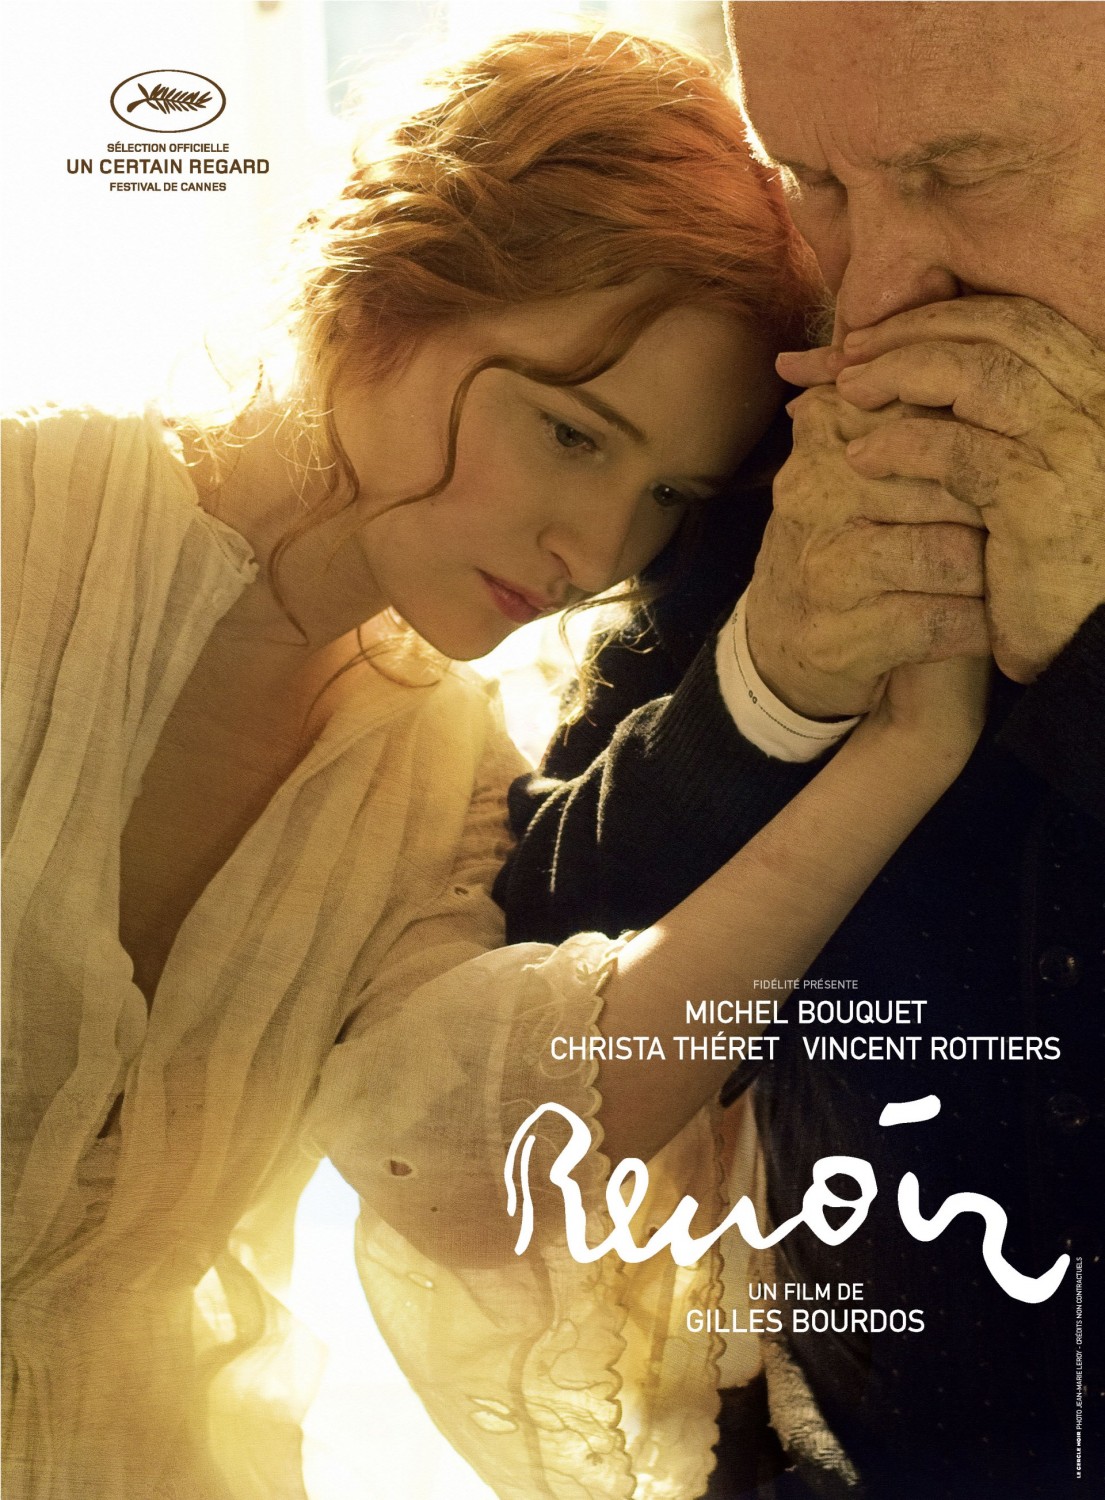 Extra Large Movie Poster Image for Renoir (#4 of 7)